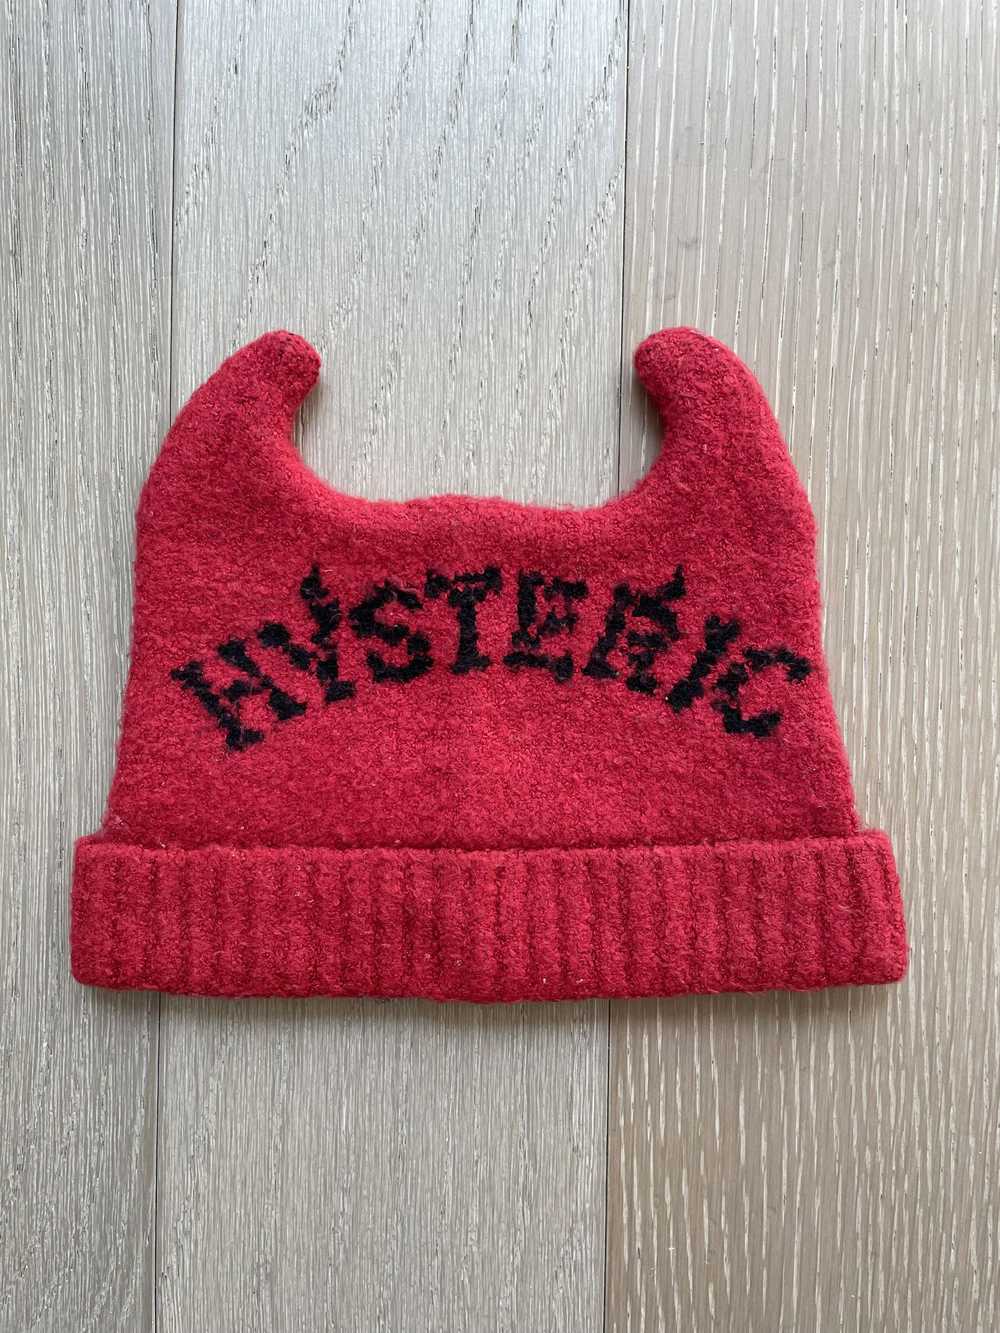 Hysteric Glamour Hysteric Mini Devil Beanie - image 1